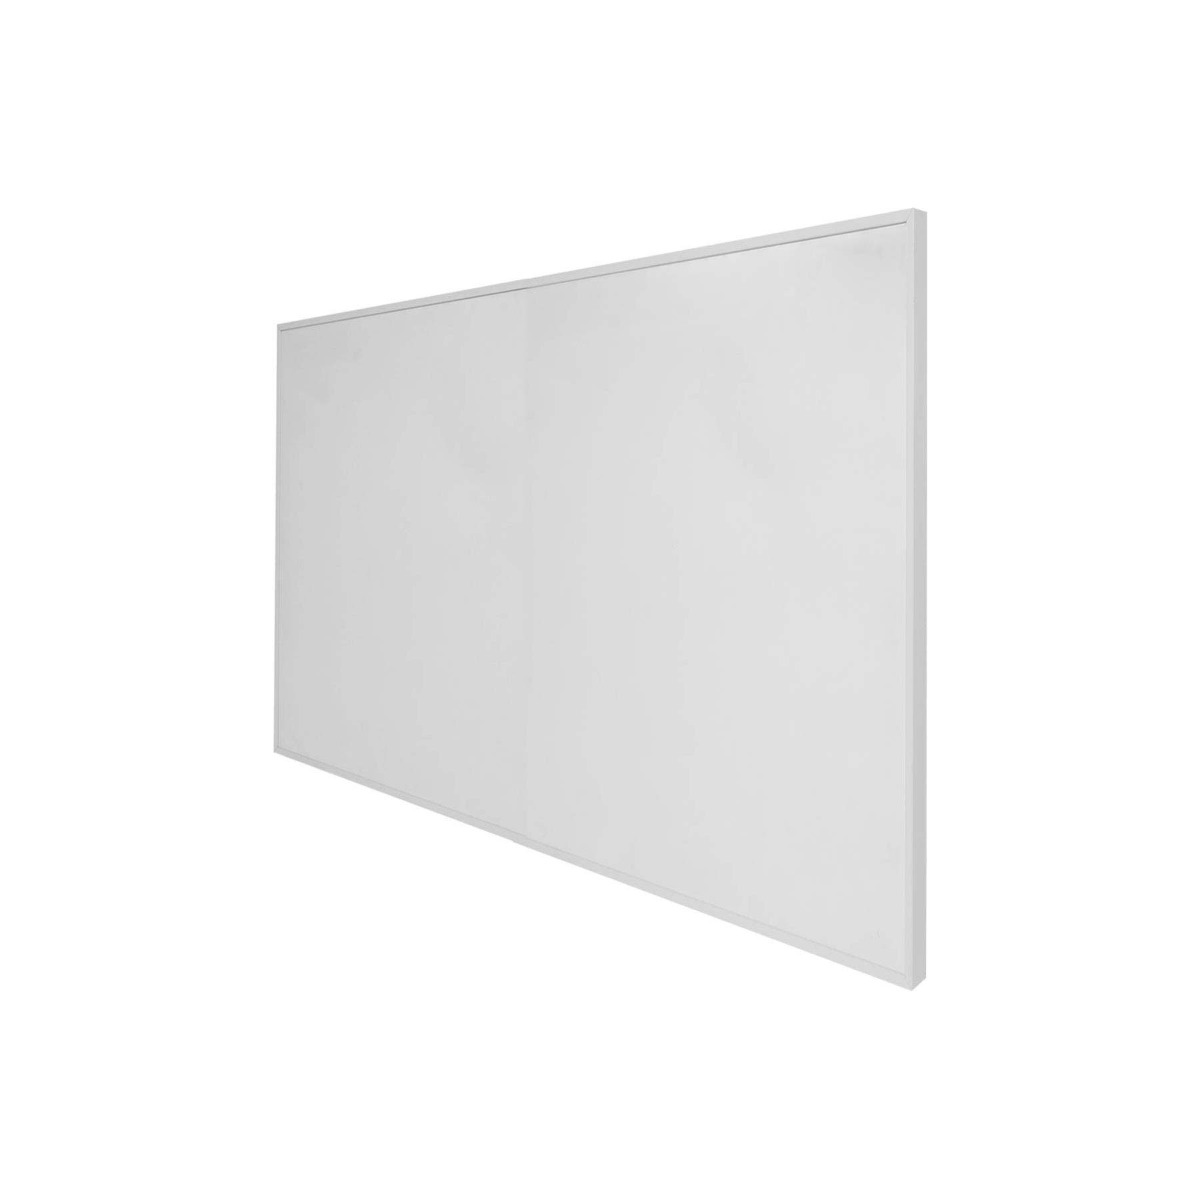 Ecostrad Accent IR Infrared Wall Panel with Remote - 580w (905 x 605mm)